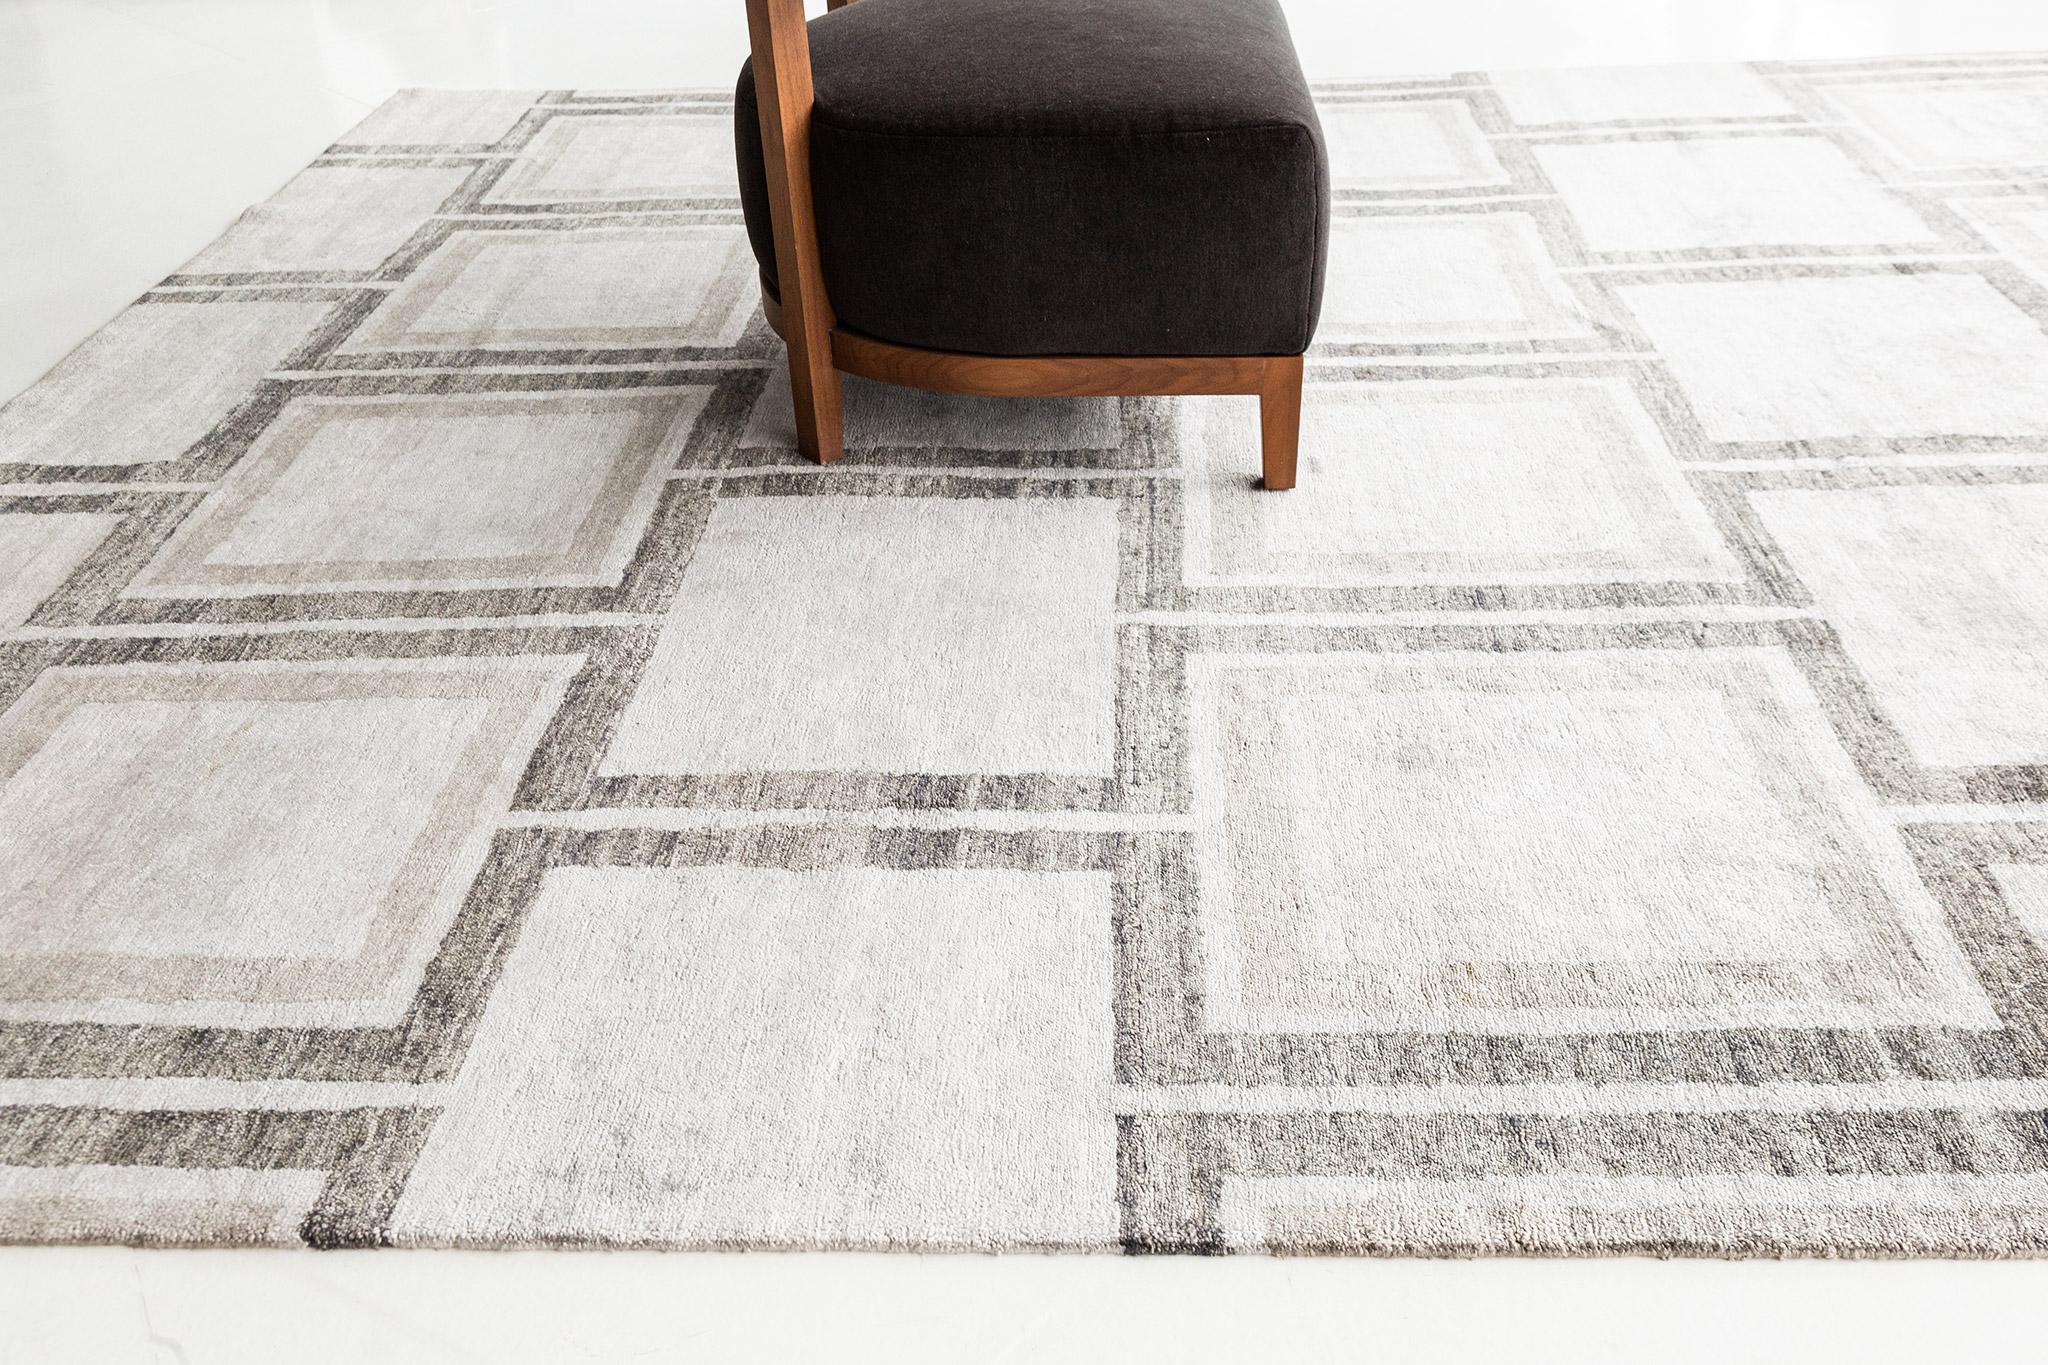 With its bold pattern and geometric aesthetics, this Modern Design Bamboo Silk Rug in Kista artfully embodies a transitional style. The field features a series of interconnected squares with rich abrash of softly gradated striations running along